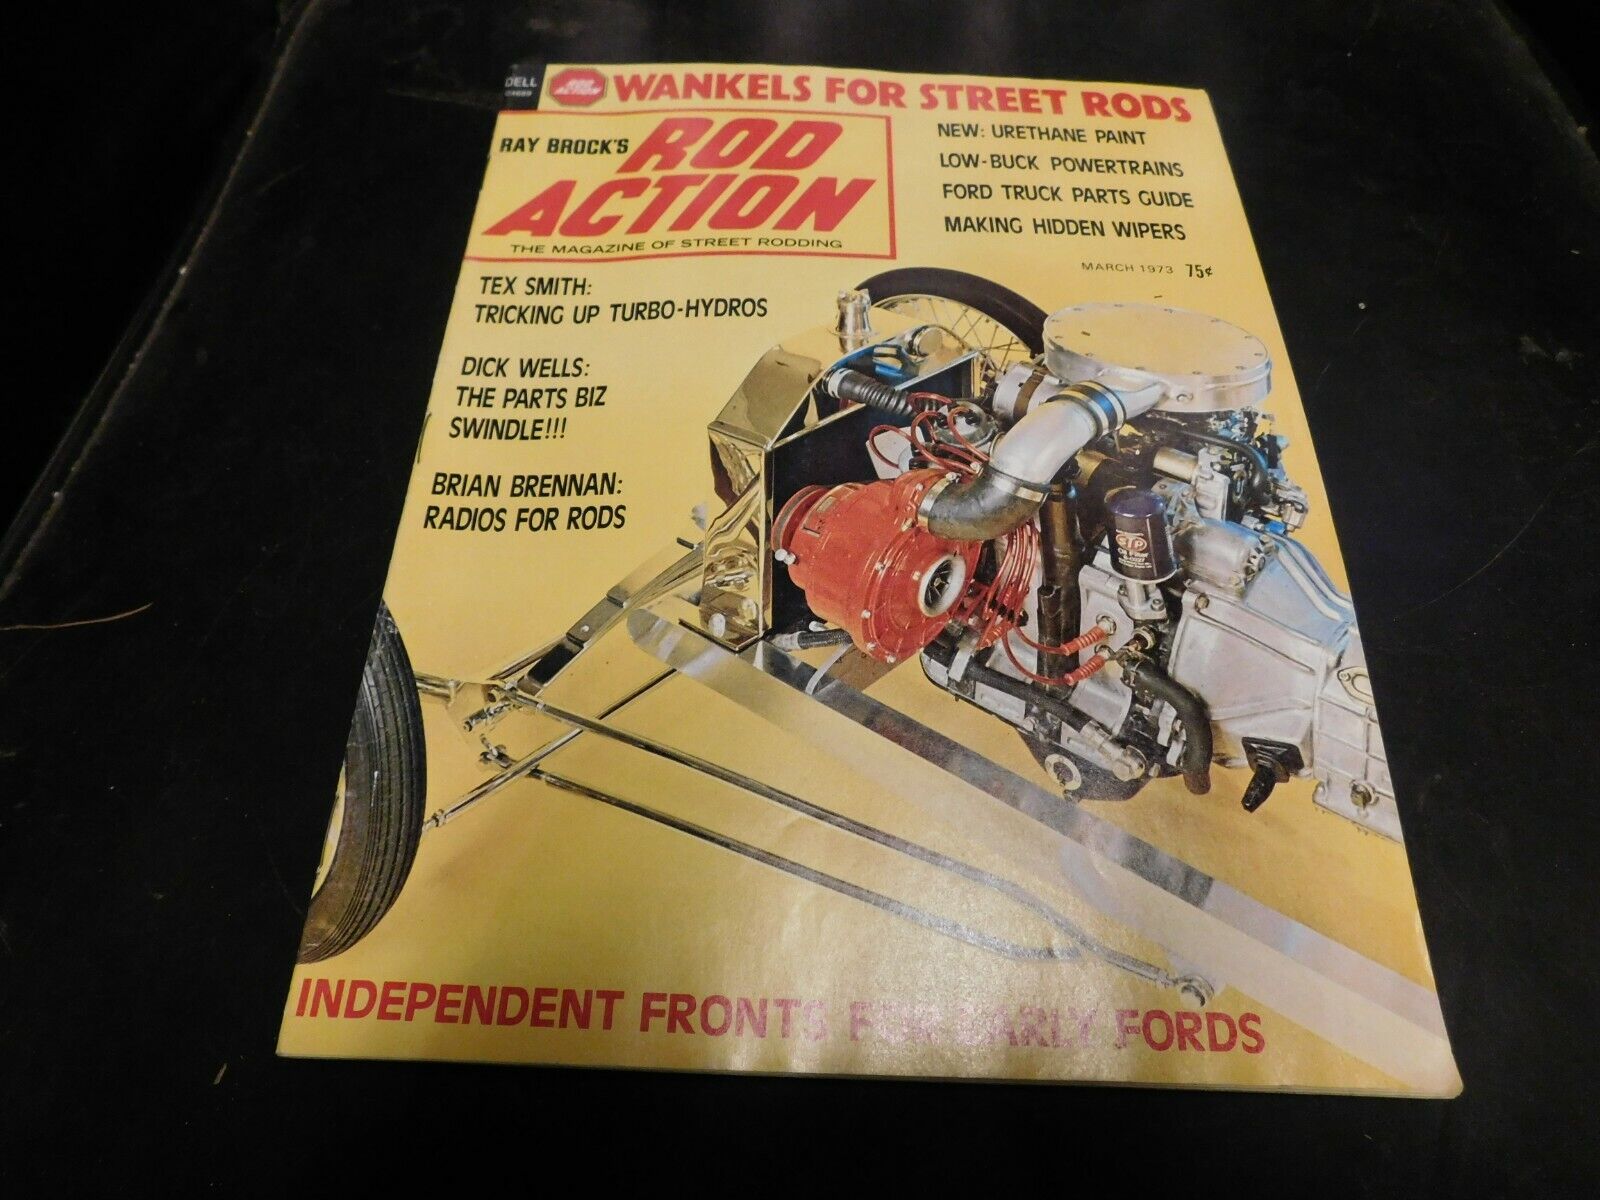 Rod Action Magazine March 1973, Making Hidden Wipers